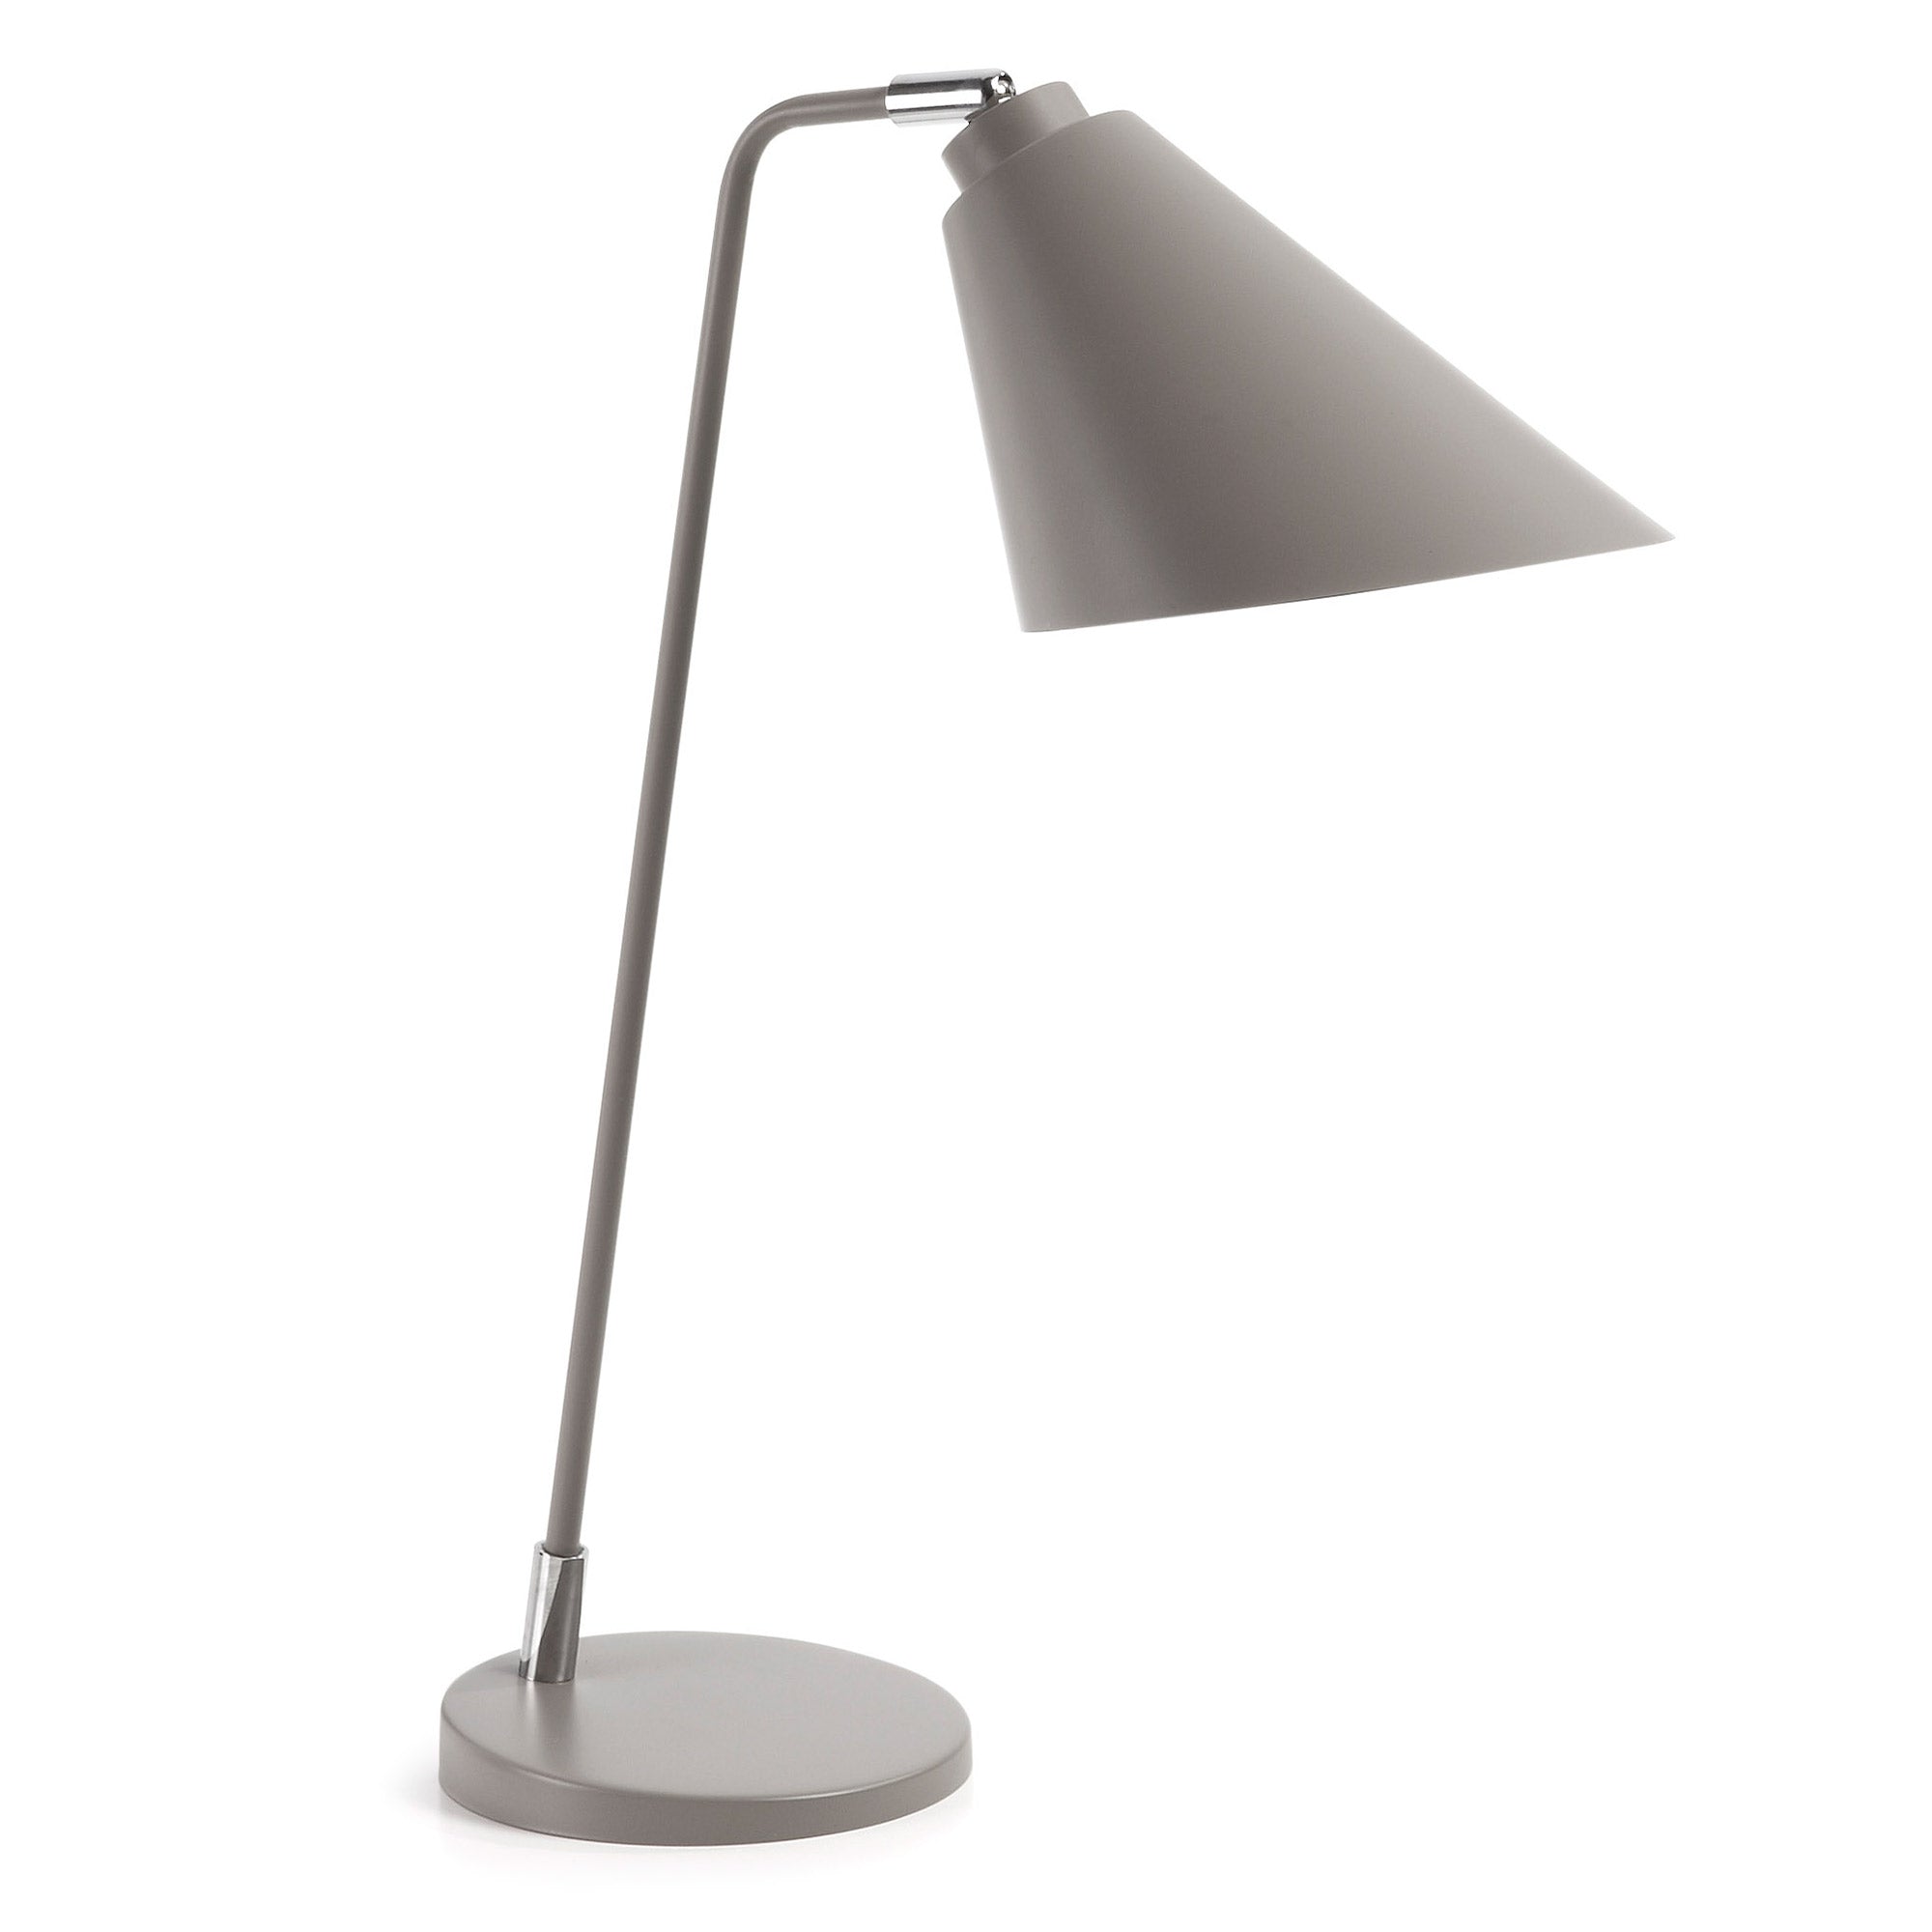 Tipir table lamp in steel with grey finish